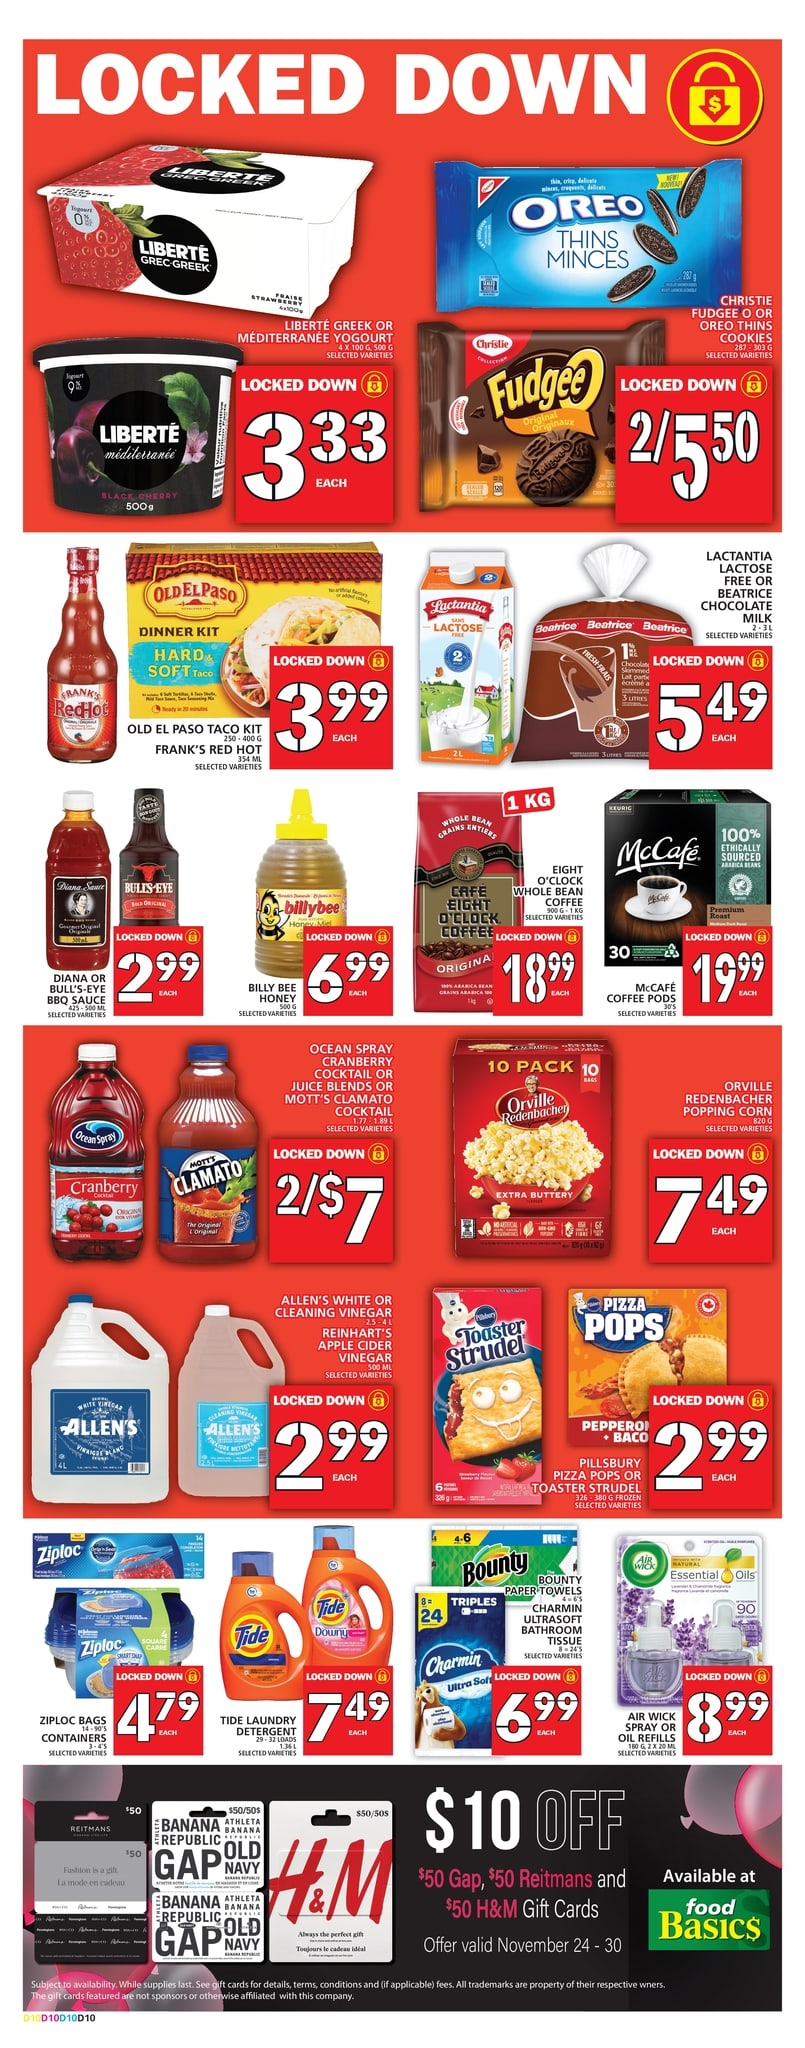 Food Basics - Weekly Flyer Specials - Page 11